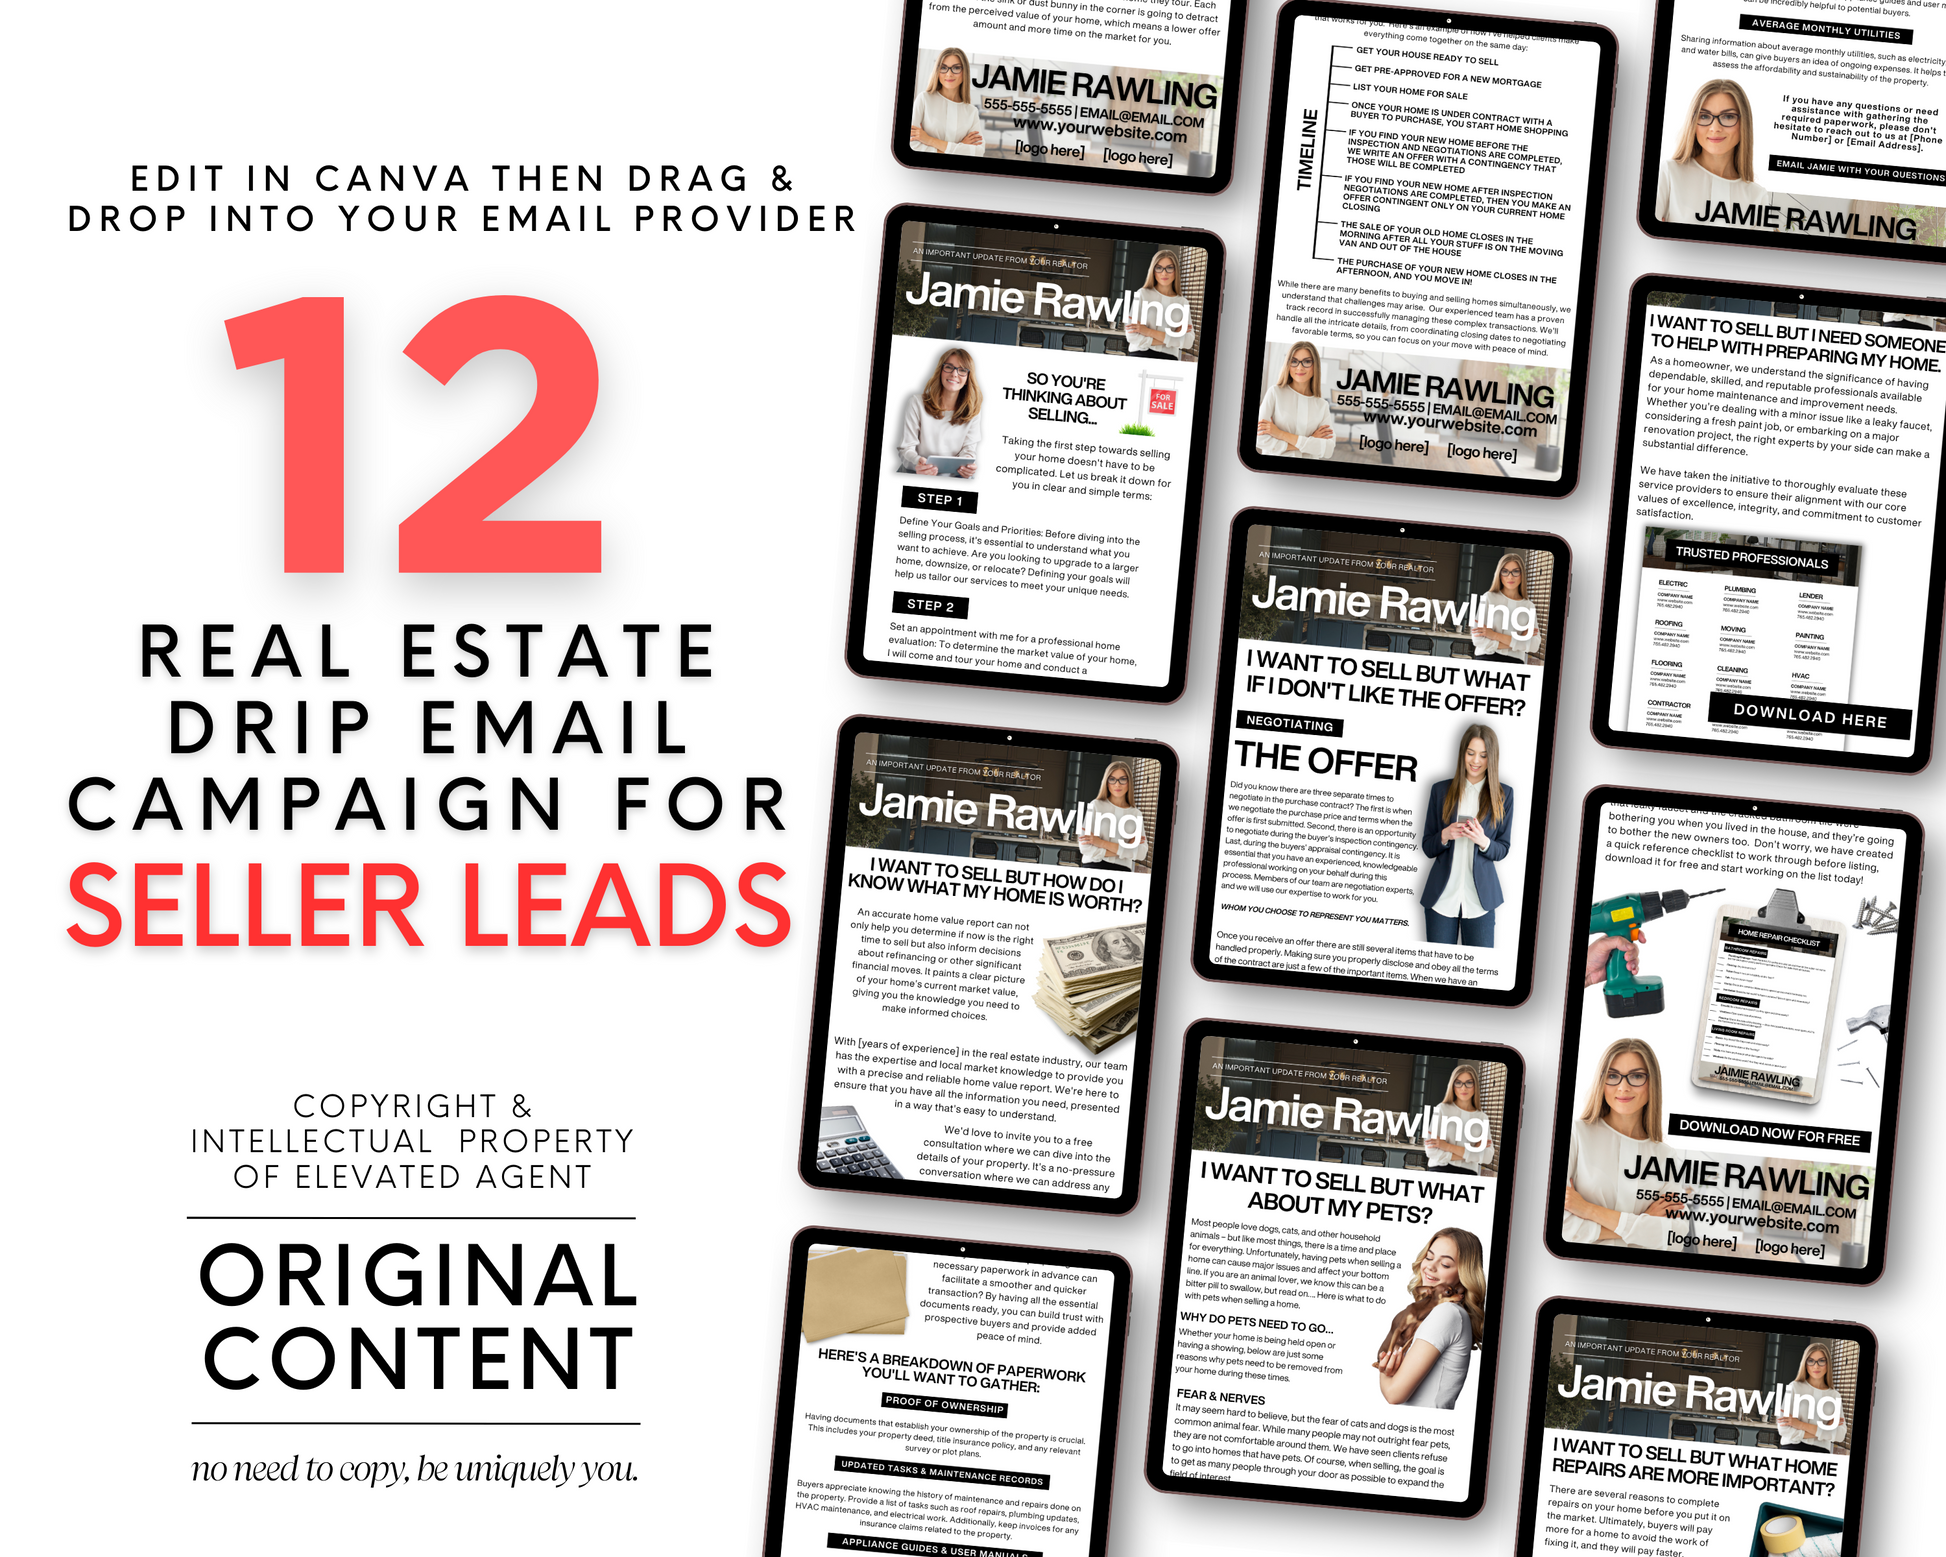 email drip campaign,email real estate,email template,home seller email,home seller packet,listing presentation,real estate buyer,real estate drip,real estate email,realtor email,transaction email